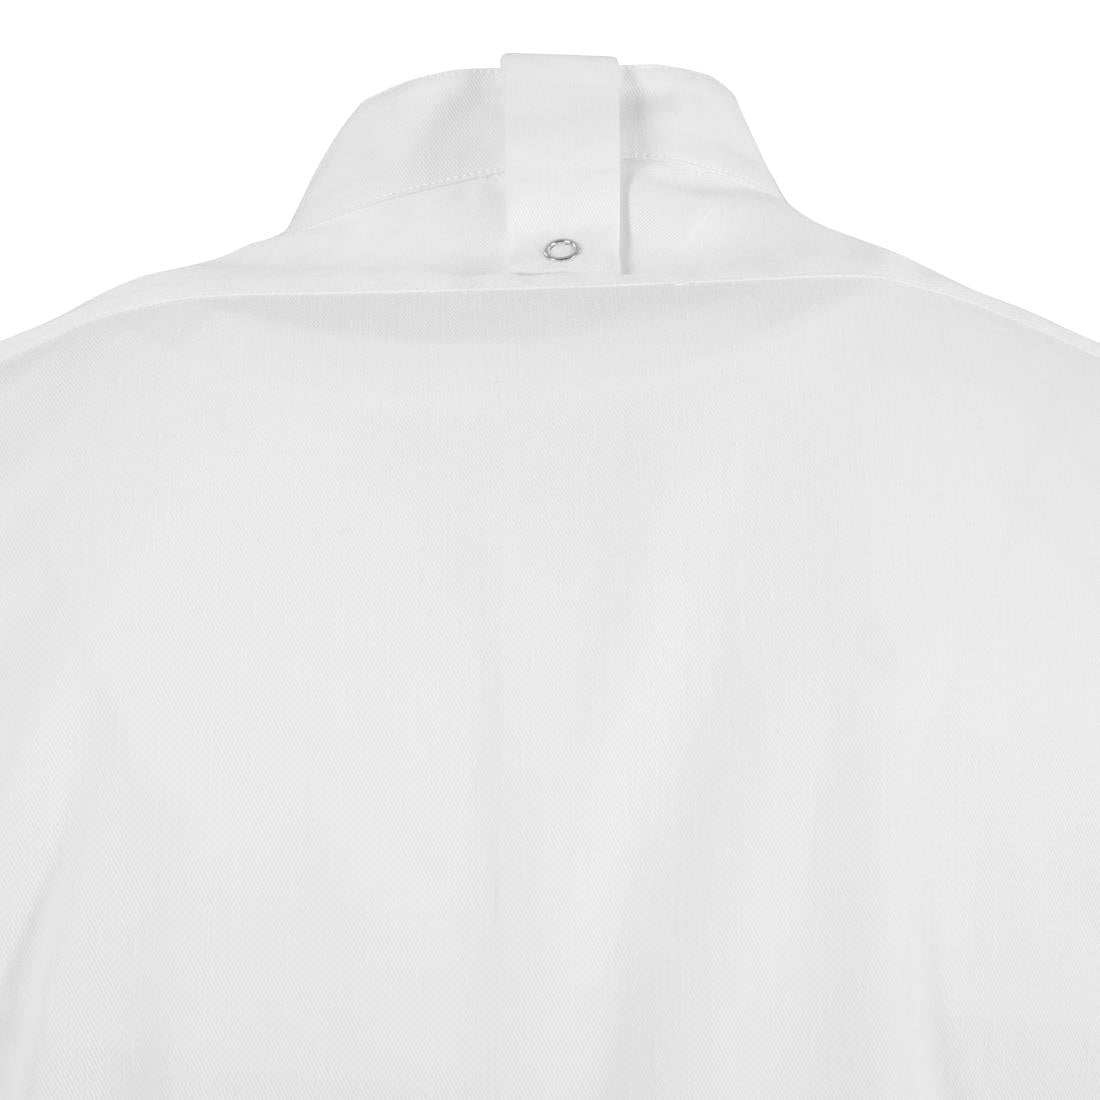 BB702-M Southside Band Collar Chefs Jacket White Size M JD Catering Equipment Solutions Ltd